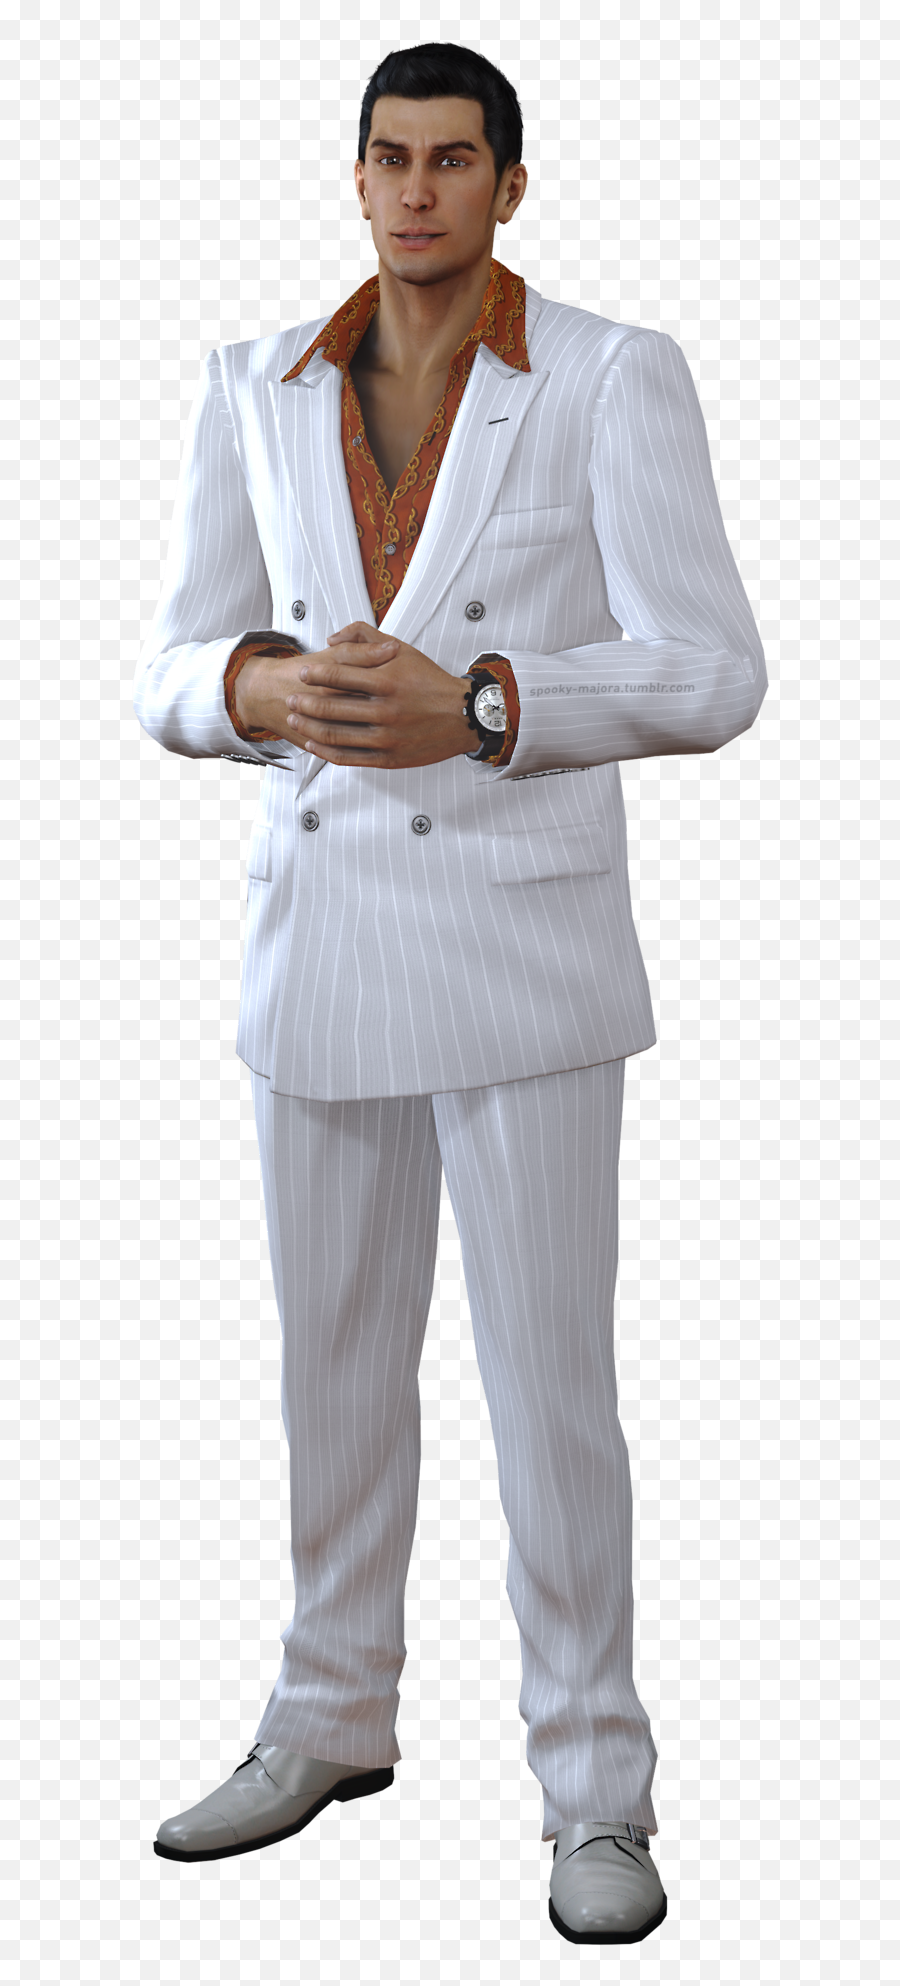 You Know I Had To Do It Em Png Hd - Transparent You Know I Had To Do,Lucky Luciano Png